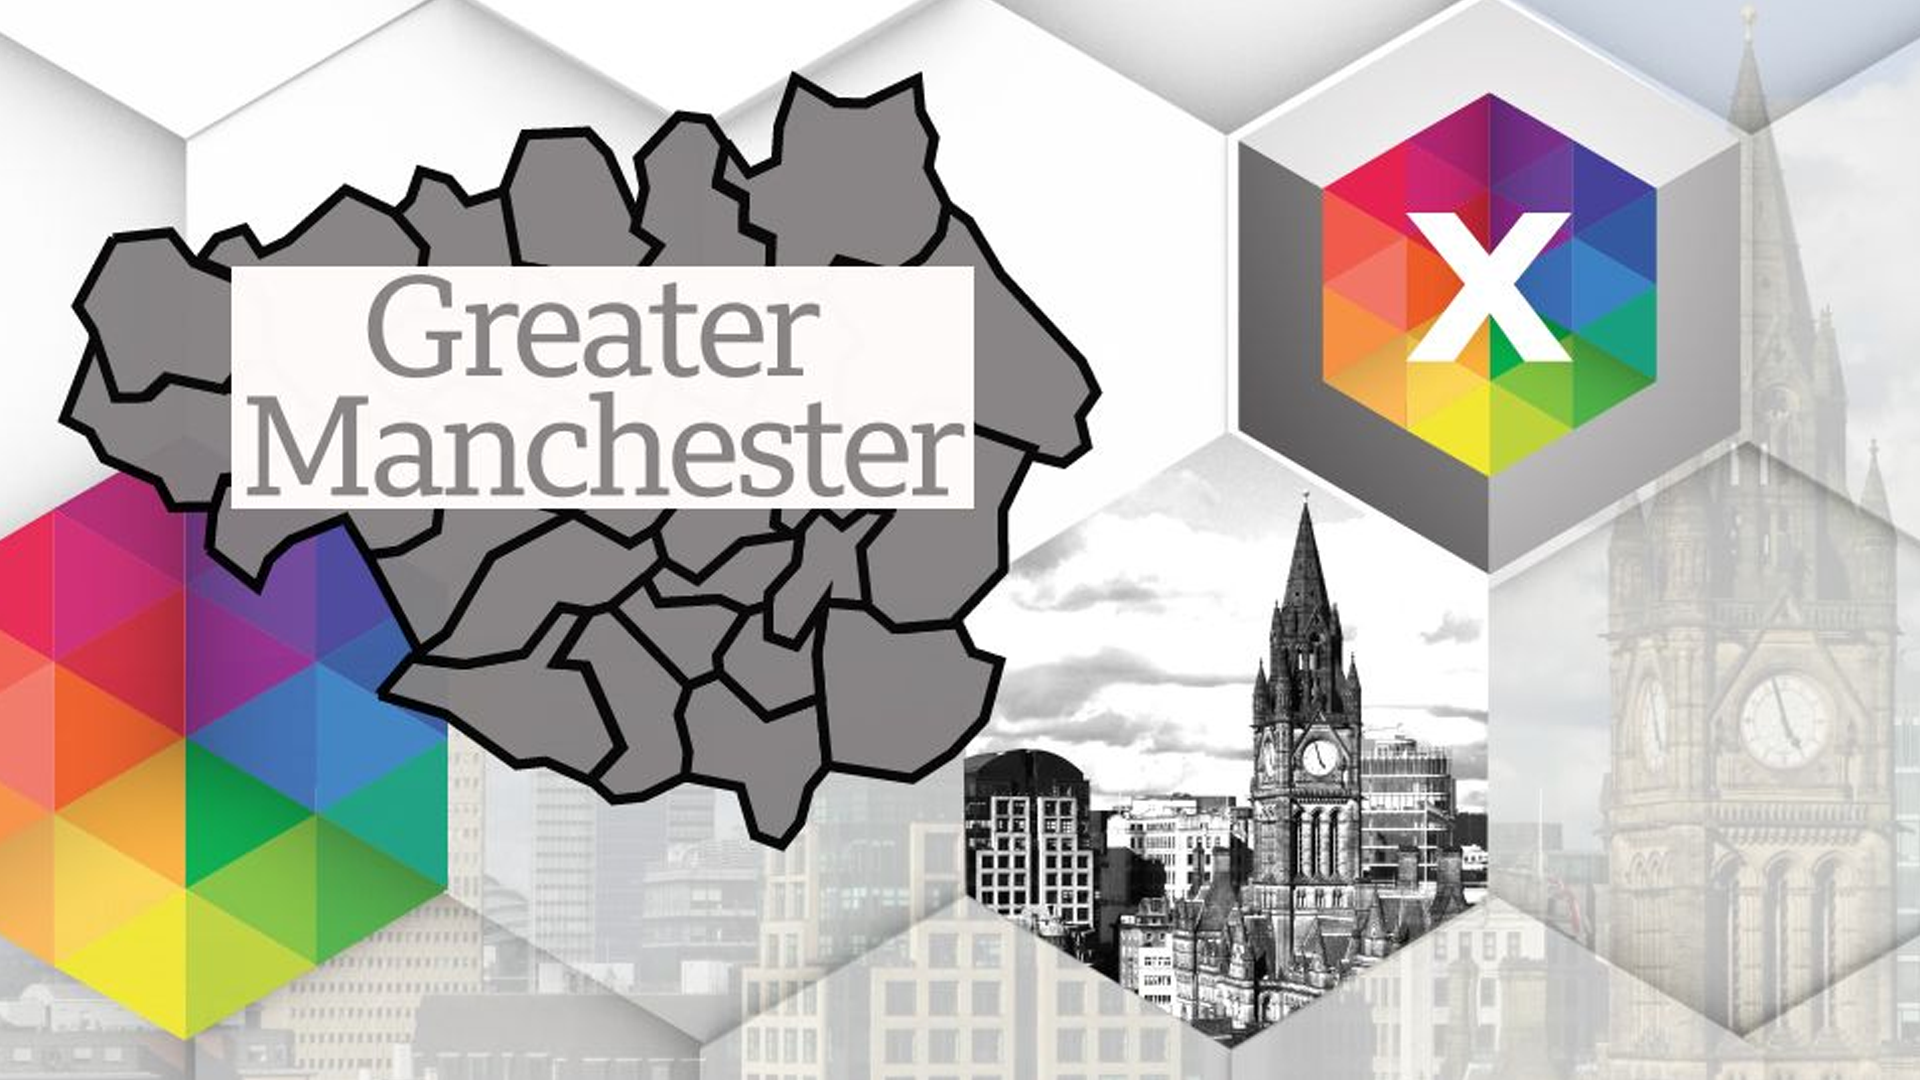 Whalley Range Labour - 2019 General Election in Manchester